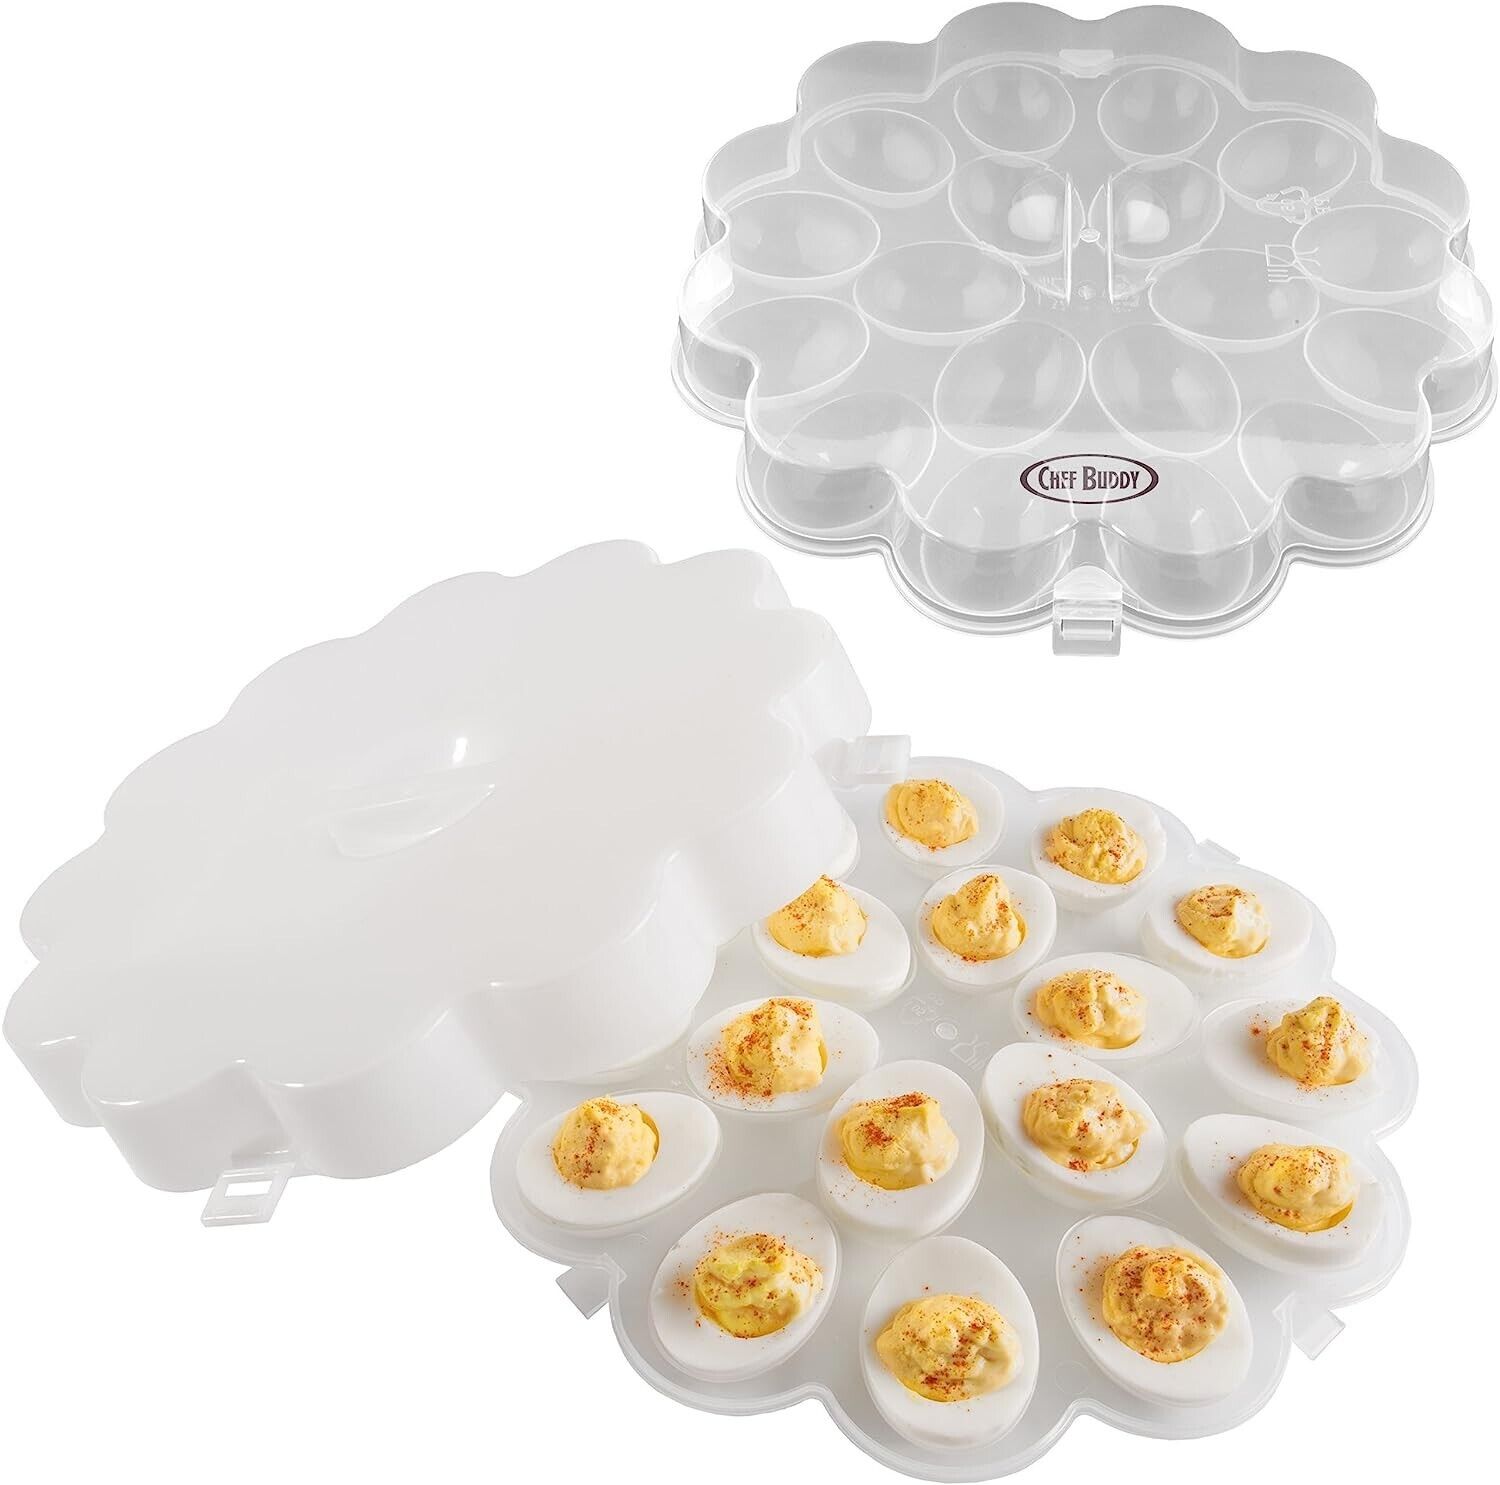 Deviled Egg Trays Snap On Lids Set of 2 Protects Safe Lid Carrier Plates Clear